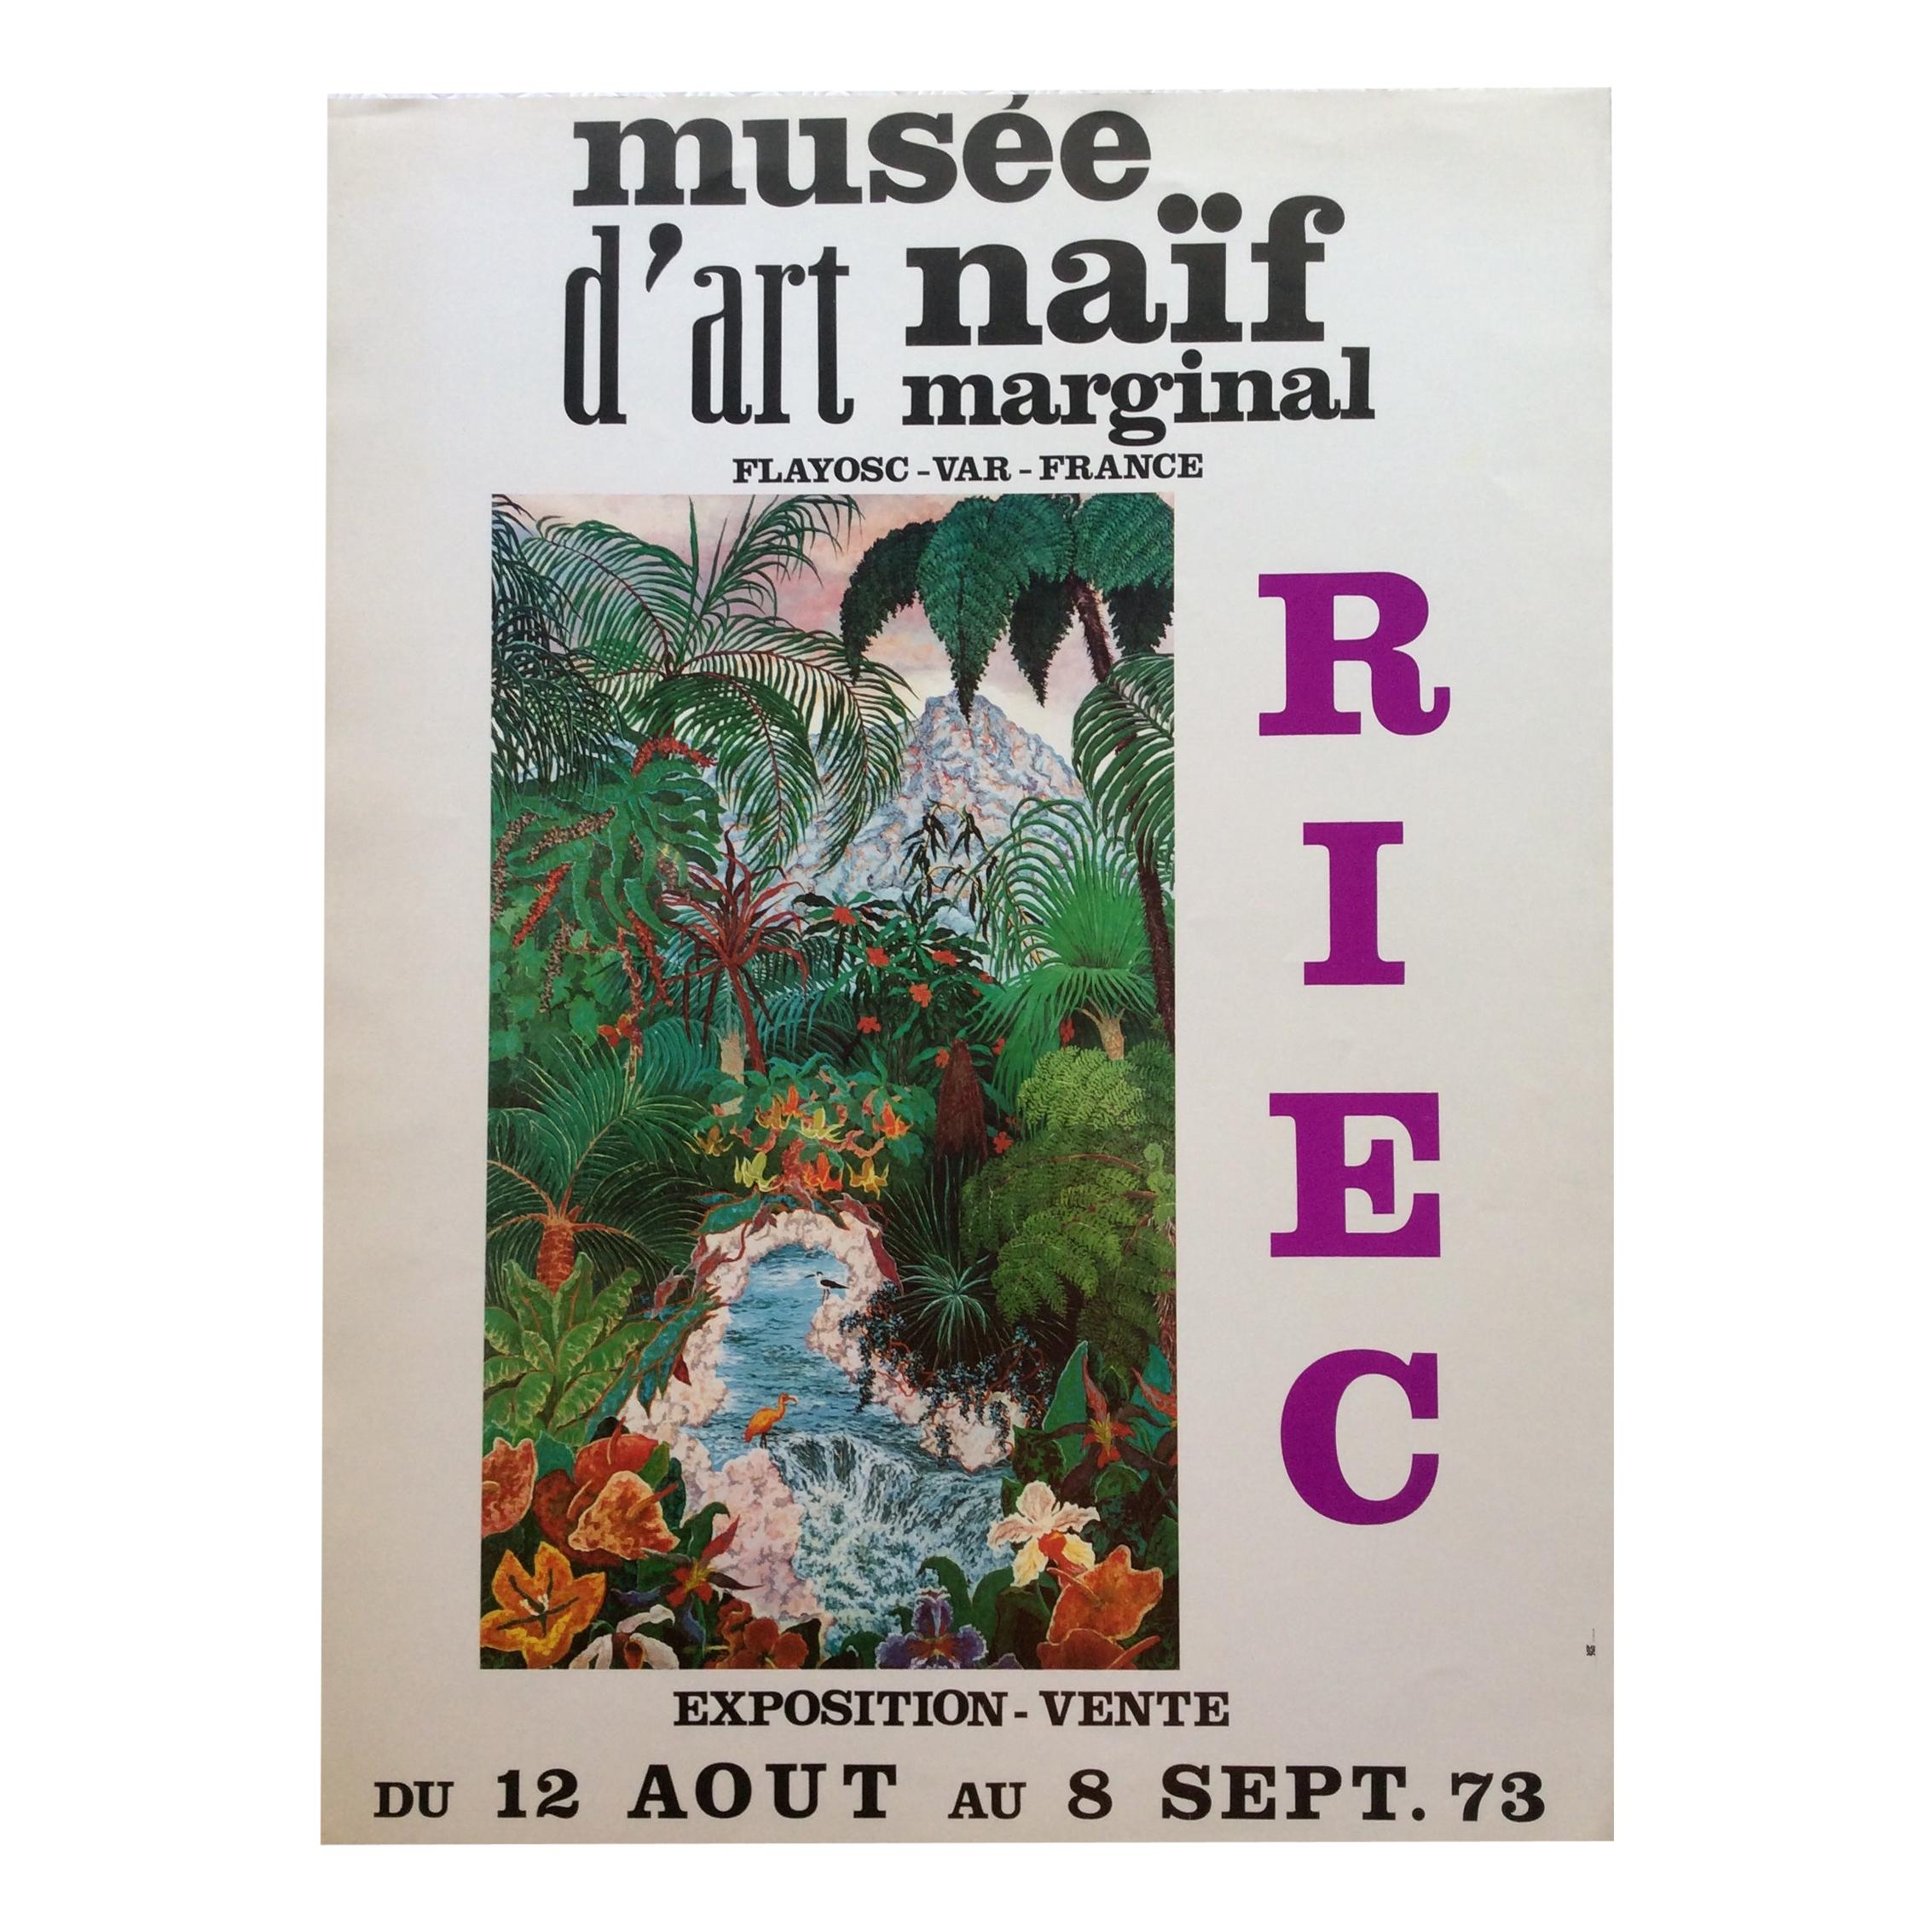 1970s Landscape Art Exhibition Poster from Musee d'Art Naif Marginal